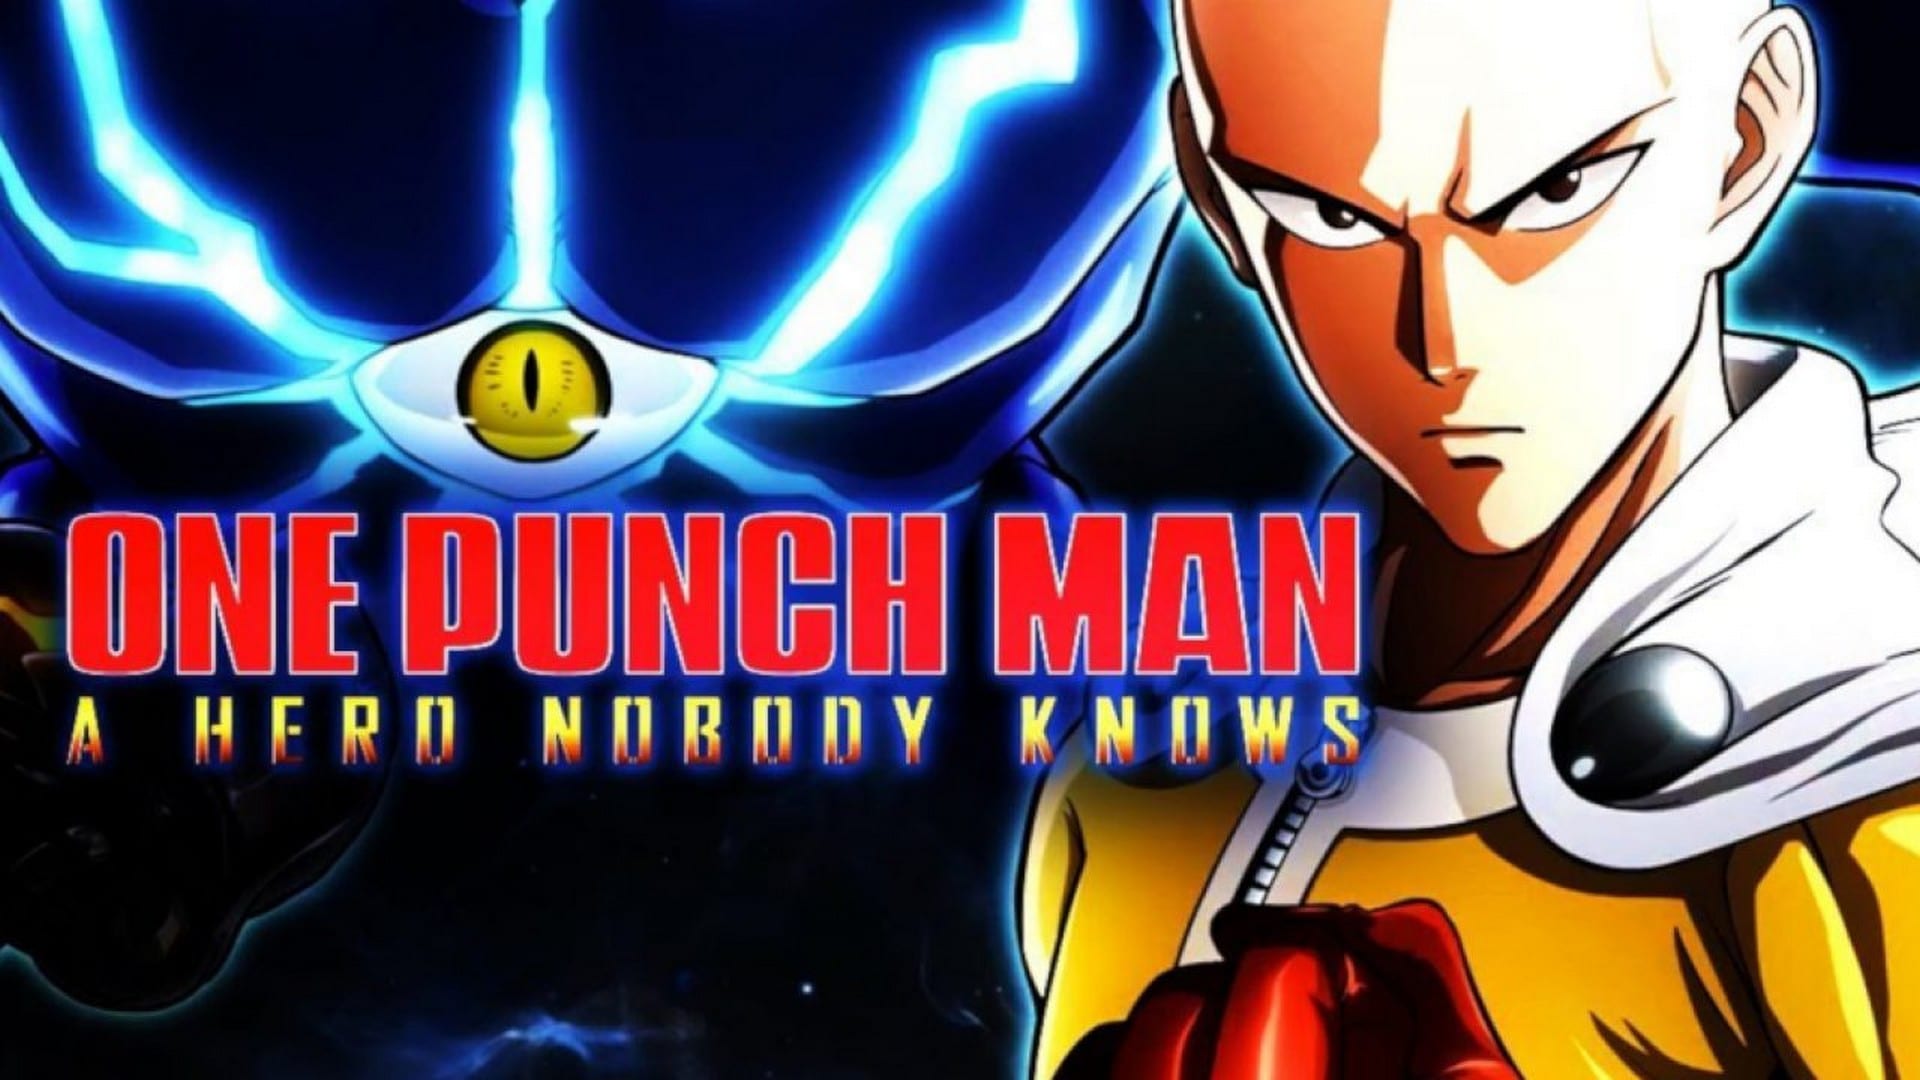 New Trailer To Celebrate The Upcoming Release of One Punch Man: A Hero Nobody Knows